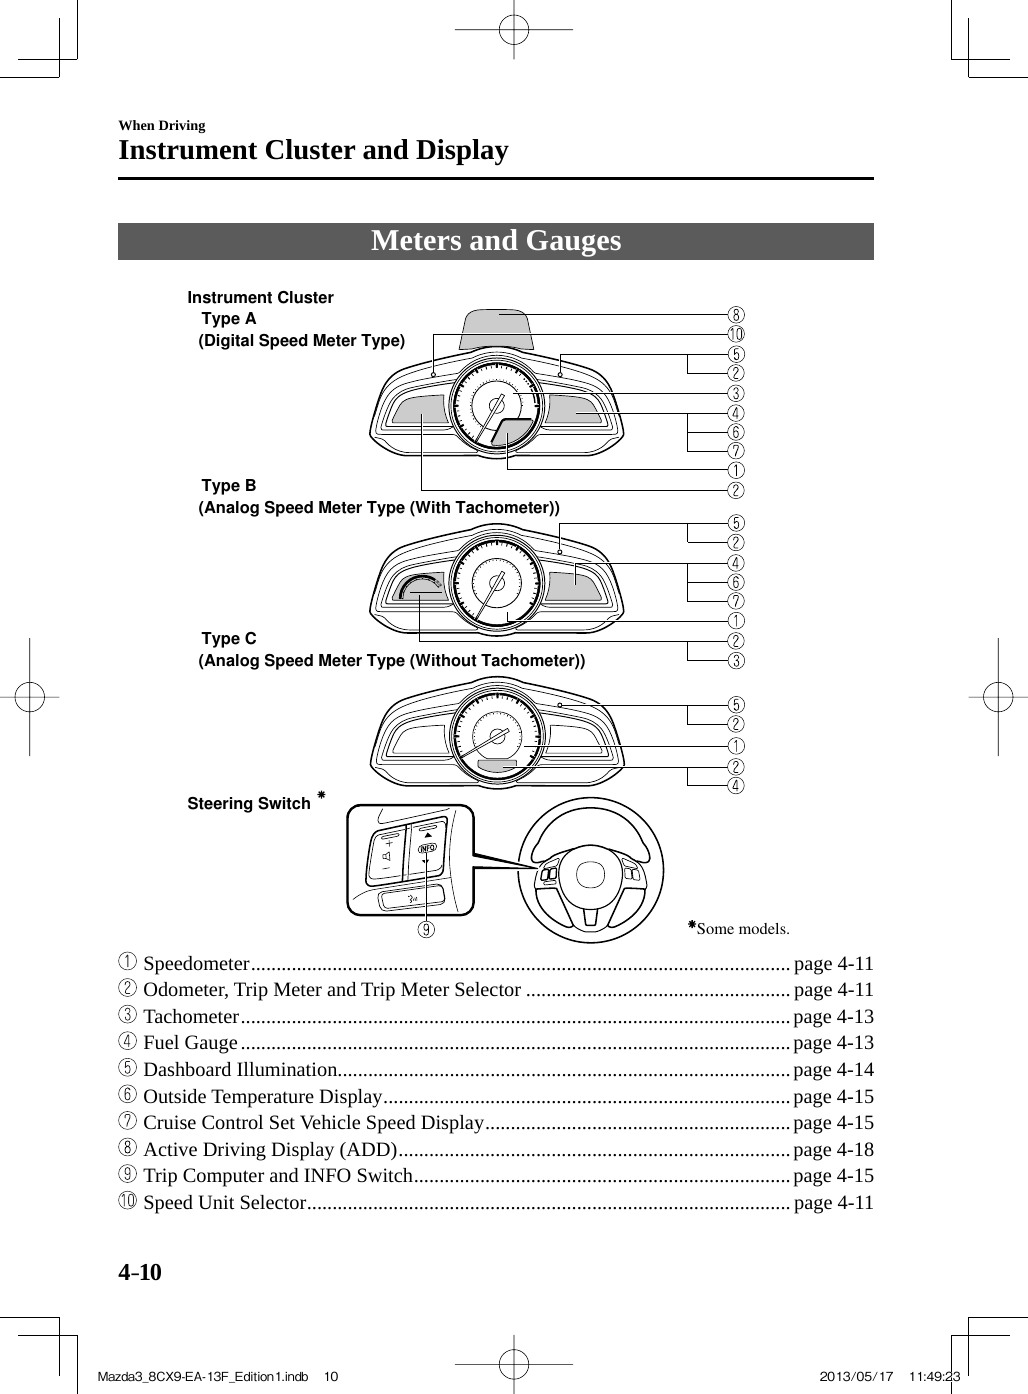 4–10When DrivingInstrument Cluster and Display     Meters  and  Gauges     Type AType B Type C Steering Switch (Digital Speed Meter Type) (Analog Speed Meter Type (With Tachometer)) (Analog Speed Meter Type (Without Tachometer))Some models.Instrument Cluster      Speedometer .......................................................................................................... page  4-11     Odometer, Trip Meter and Trip Meter Selector .................................................... page  4-11     Tachometer ............................................................................................................page  4-13     Fuel Gauge ............................................................................................................page  4-13     Dashboard Illumination.........................................................................................page  4-14     Outside Temperature Display ................................................................................page  4-15     Cruise Control Set Vehicle Speed Display ............................................................page  4-15     Active Driving Display (ADD) .............................................................................page  4-18     Trip Computer and INFO Switch ..........................................................................page  4-15     Speed Unit Selector ............................................................................................... page  4-11 Mazda3_8CX9-EA-13F_Edition1.indb   10Mazda3_8CX9-EA-13F_Edition1.indb   10 2013/05/17   11:49:232013/05/17   11:49:23